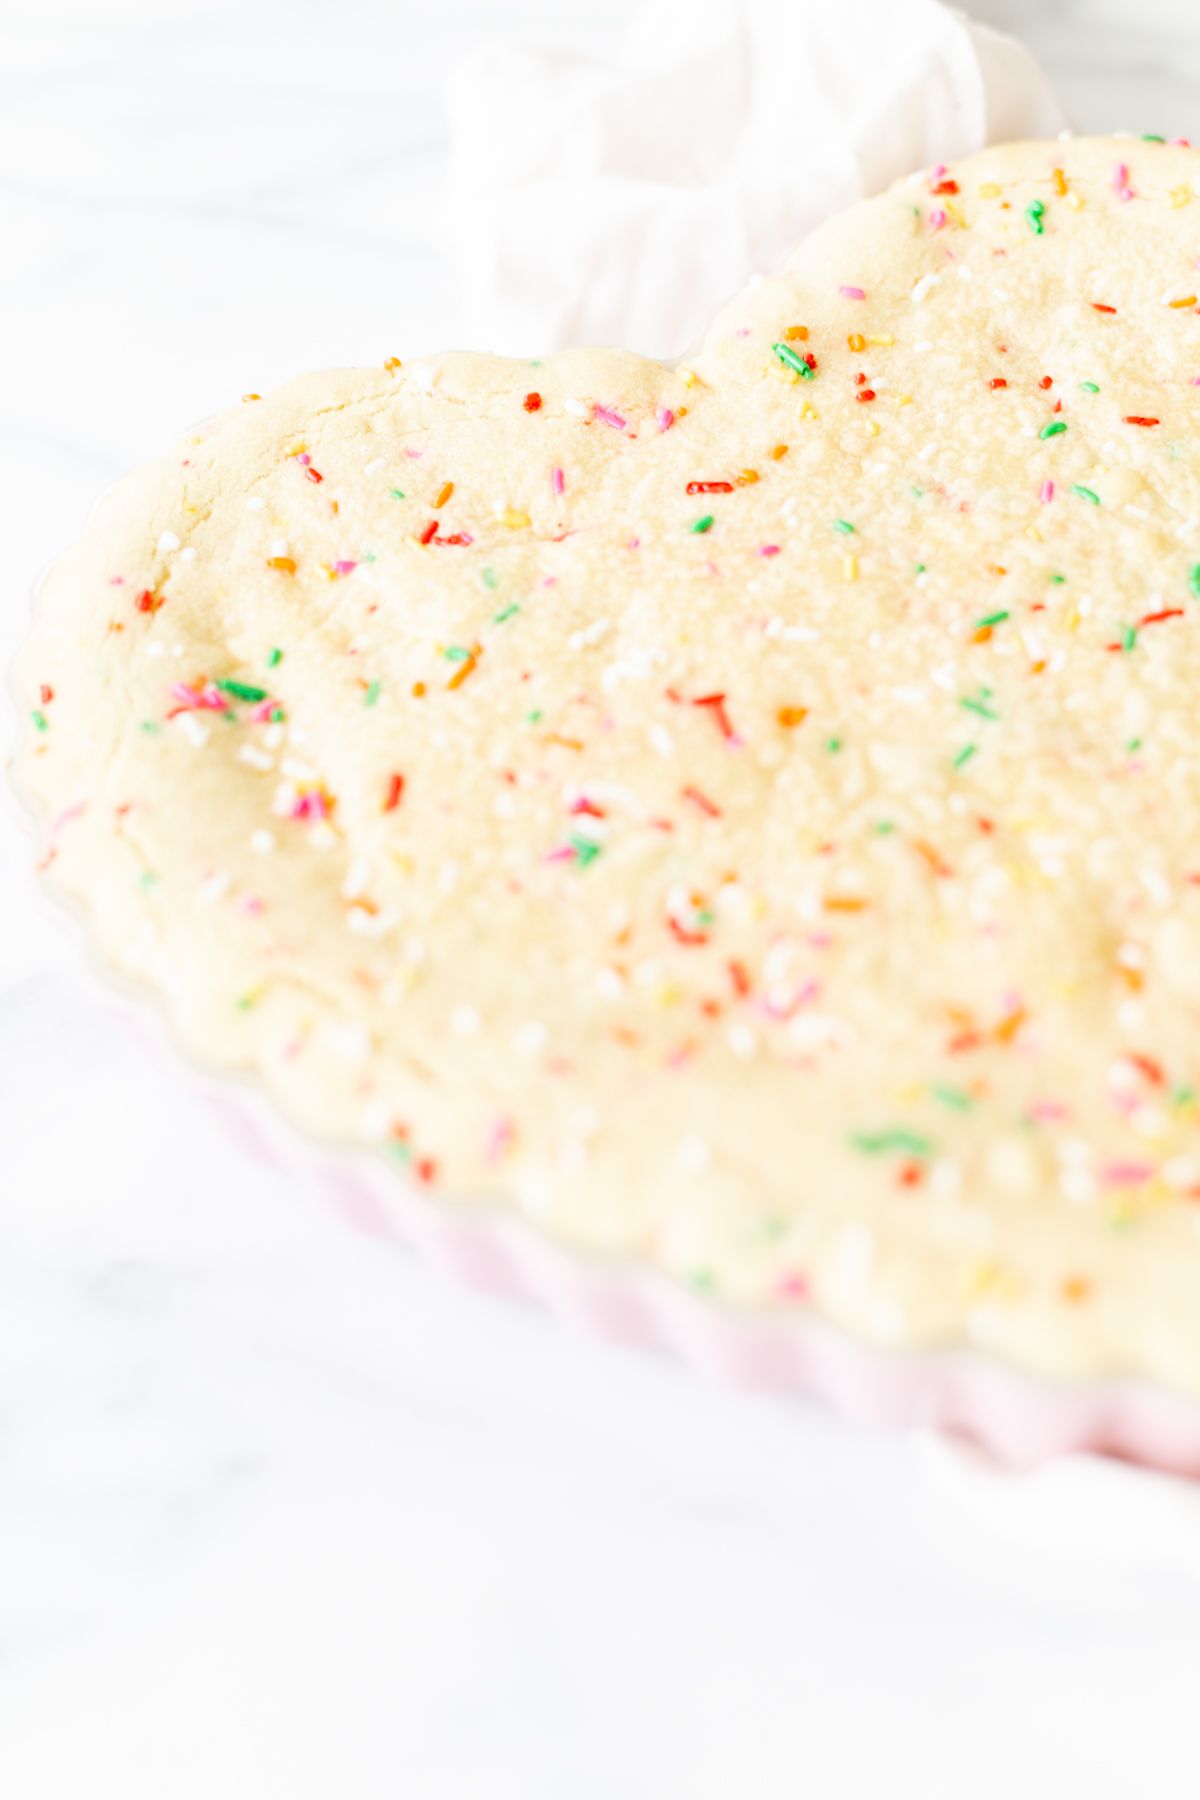 A funfetti cookie cake baked into a heart shaped pan.